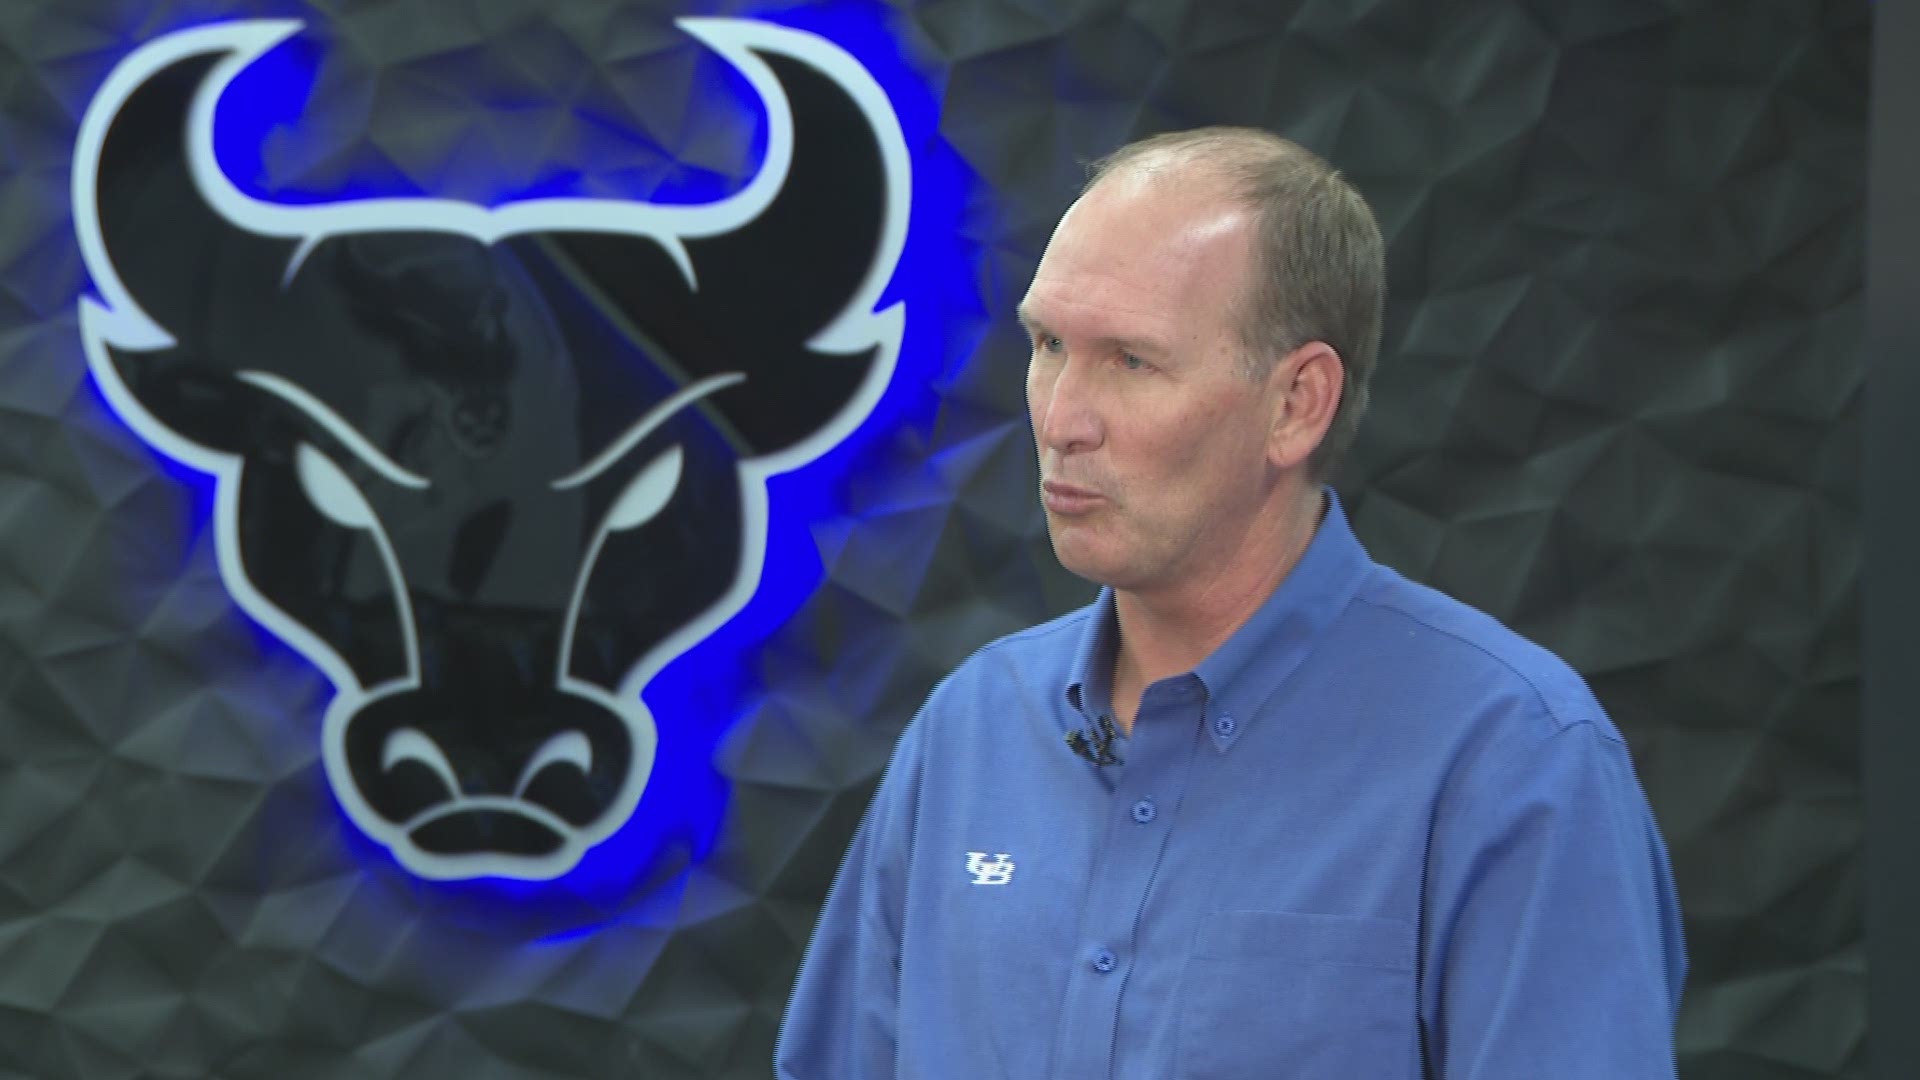 WGRZ's Adam Benigni speaks to UB head coach Lance Leipold ahead of Buffalo's match-up with Toledo Saturday that you can see live on Channel 2 starting at noon.